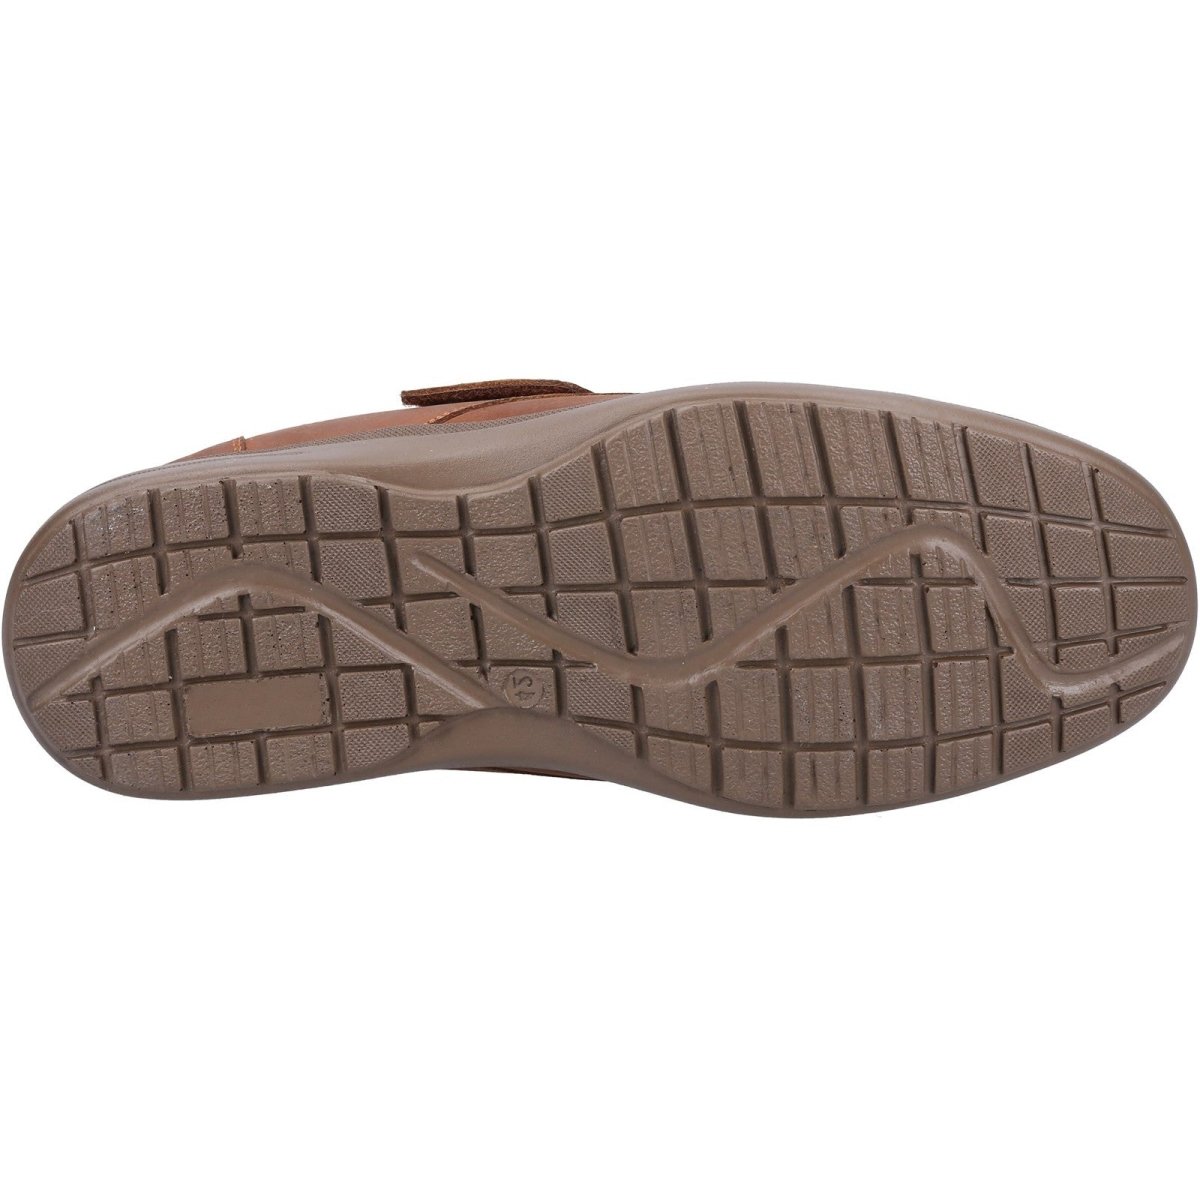 Fleet & Foster David Mens Leather Touch-Fastening Moccasin Shoes - Shoe Store Direct